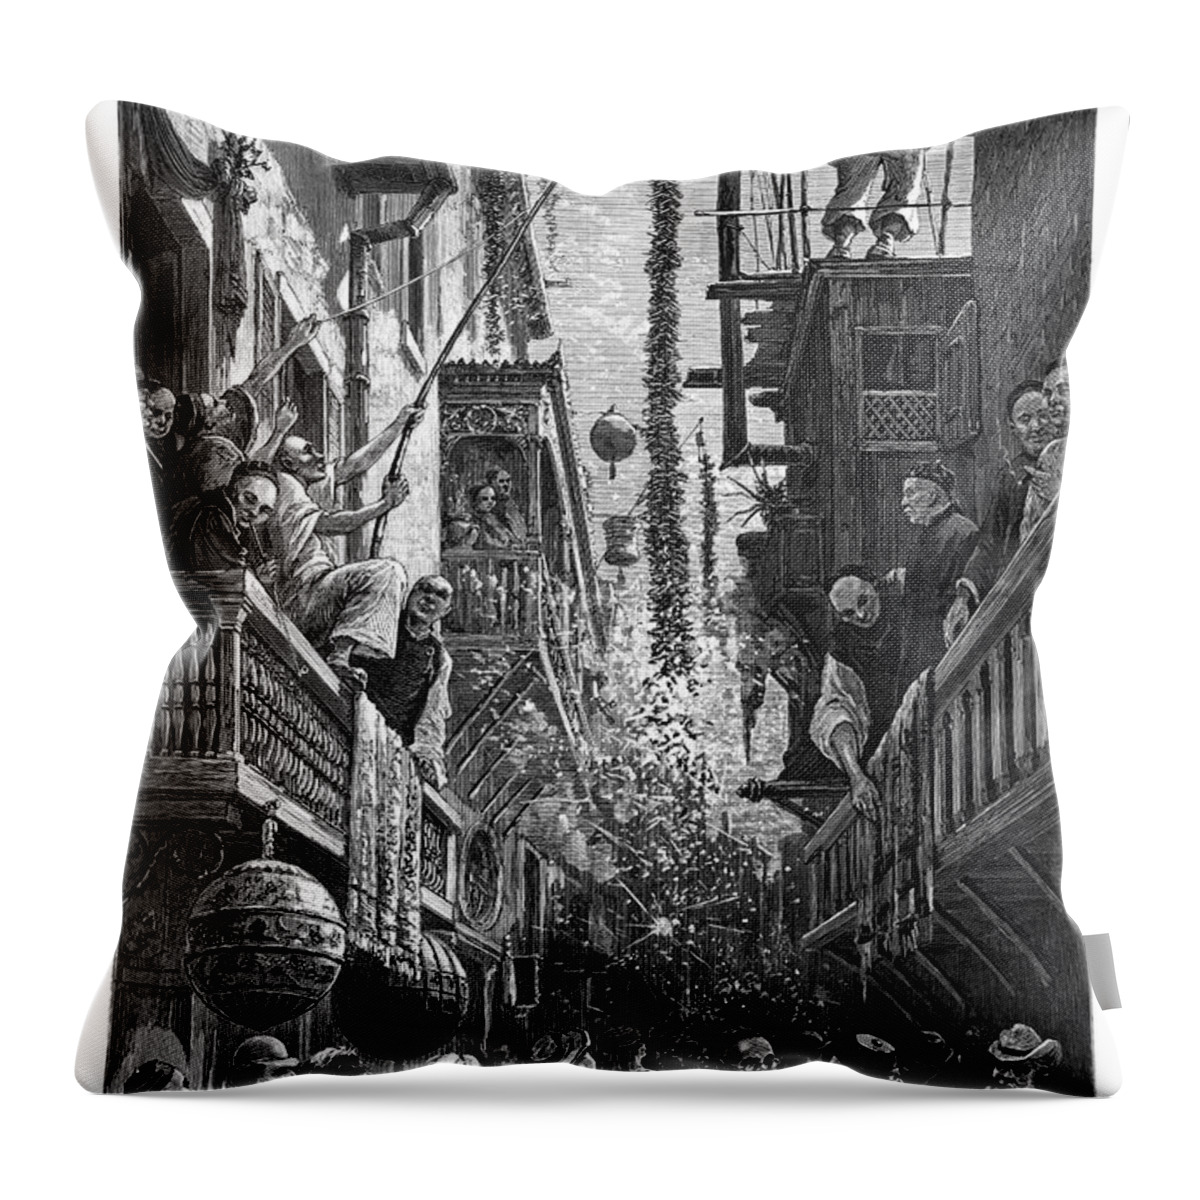 1880 Throw Pillow featuring the painting San Francisco Chinatown #4 by Granger